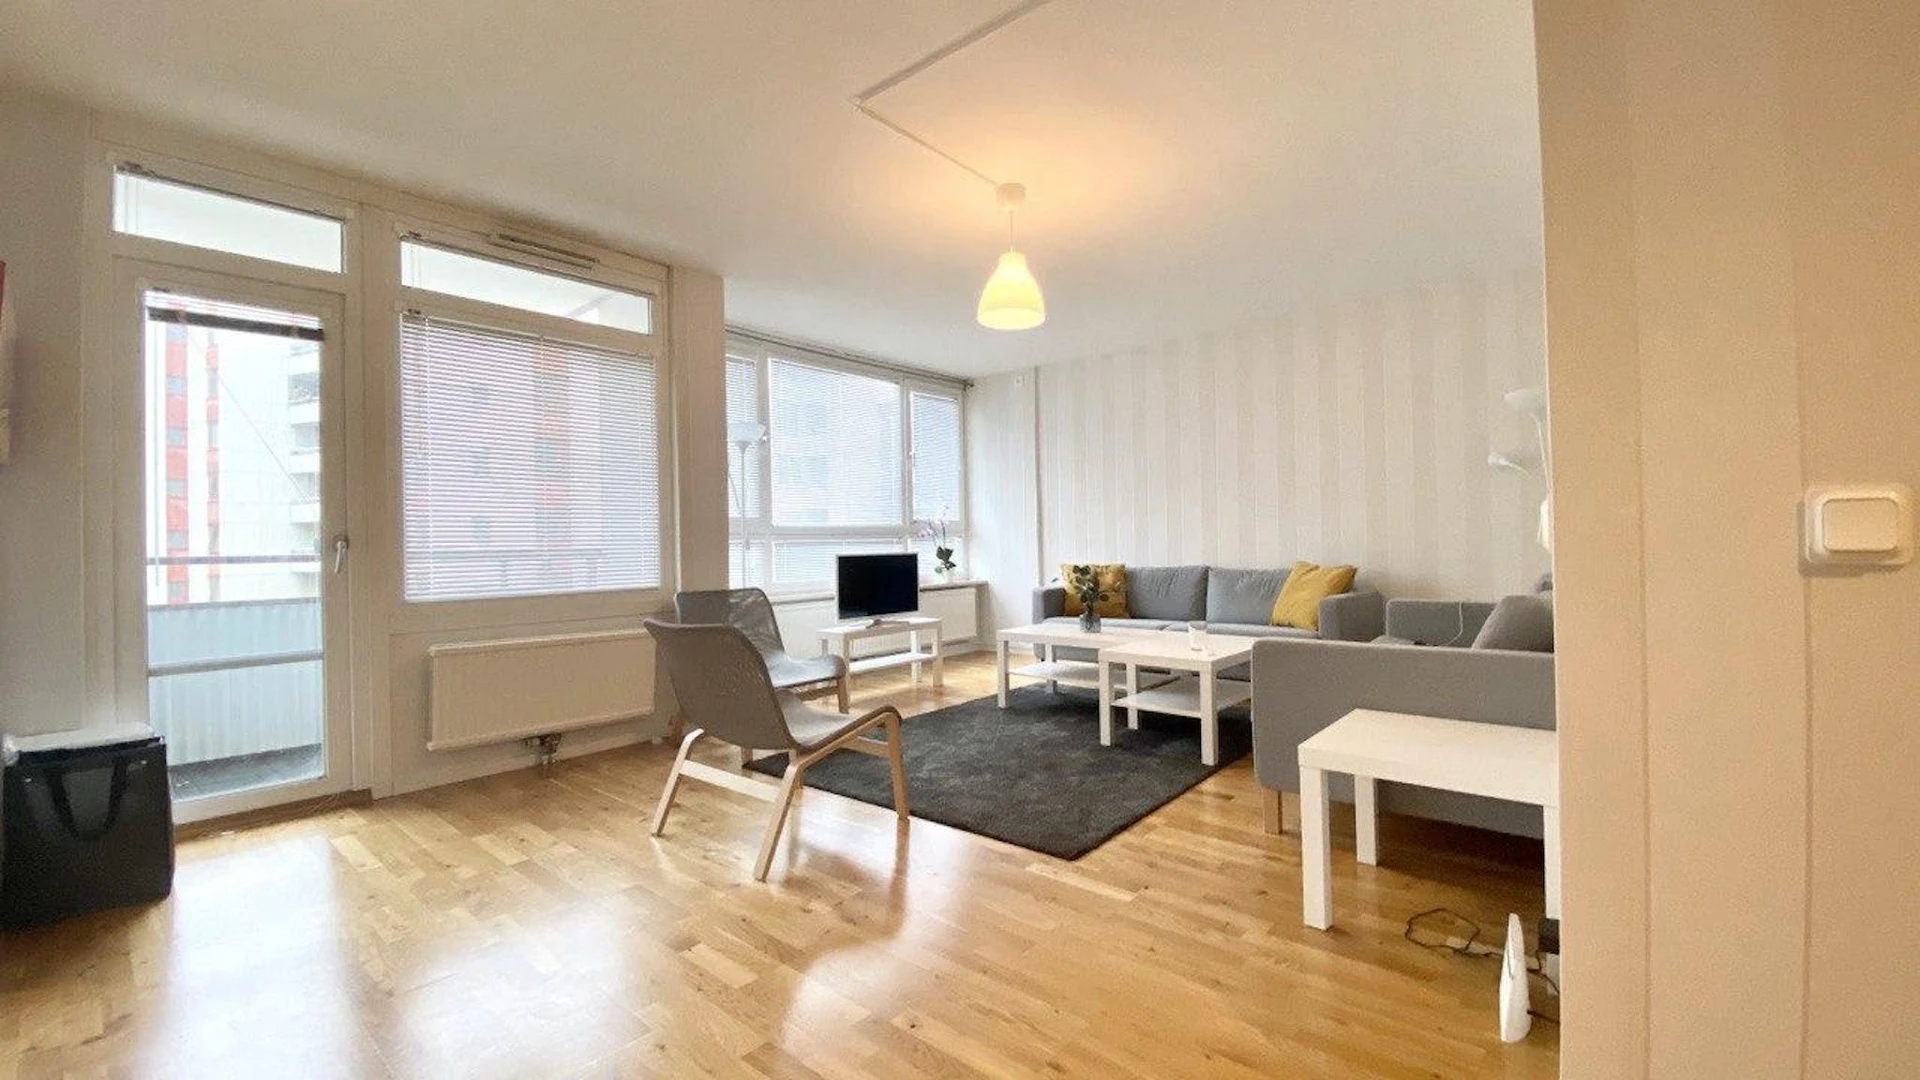 Room for rent in a shared flat in Gothenburg